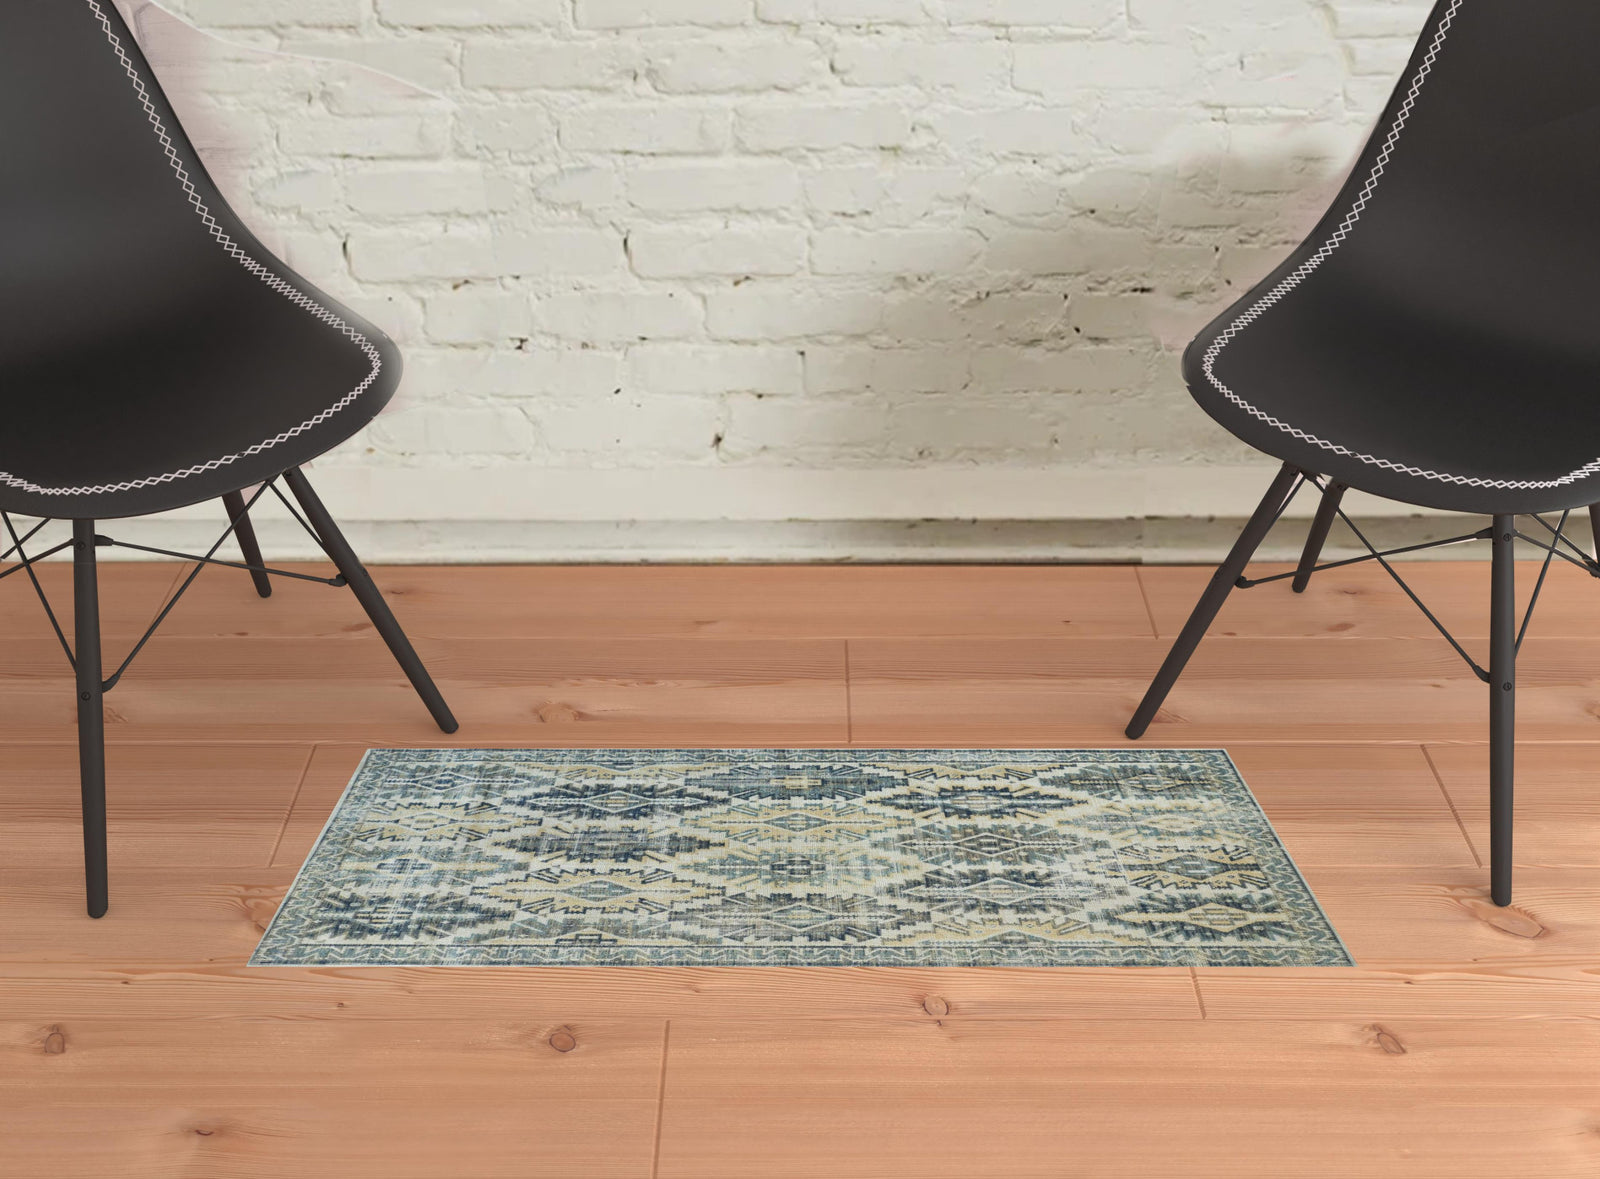 2' X 3' Green Blue And Ivory Abstract Power Loom Distressed Stain Resistant Area Rug